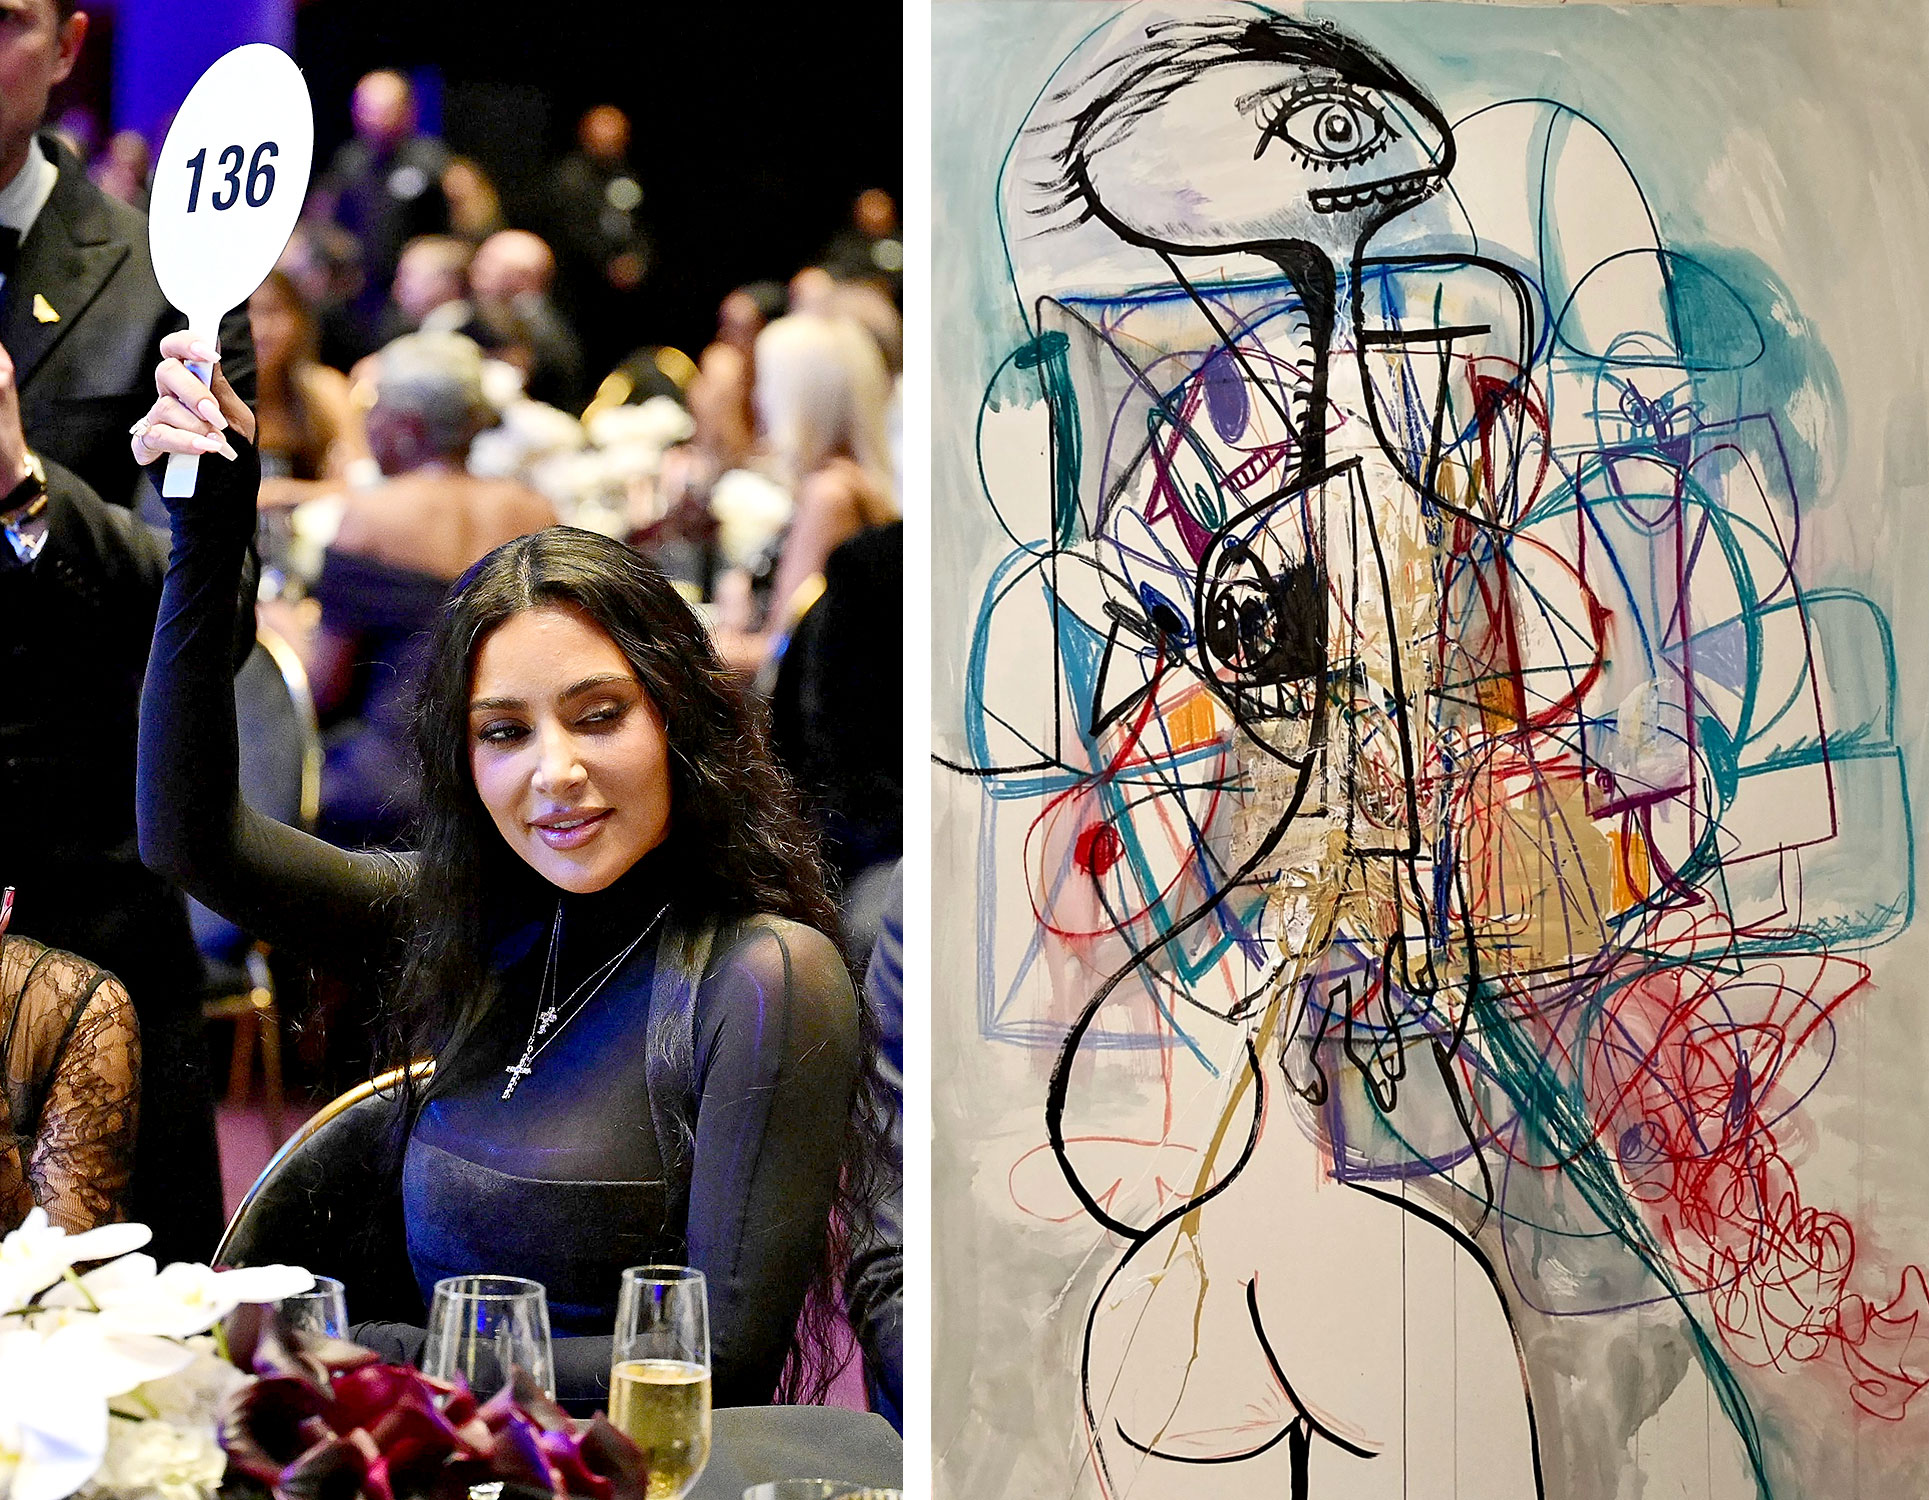 A Cheeky Bidding War Broke Out Between Kim Kardashian and Tom Brady Over a $2 Million George Condo Artwork. Ultimately, They Both Got Lucky